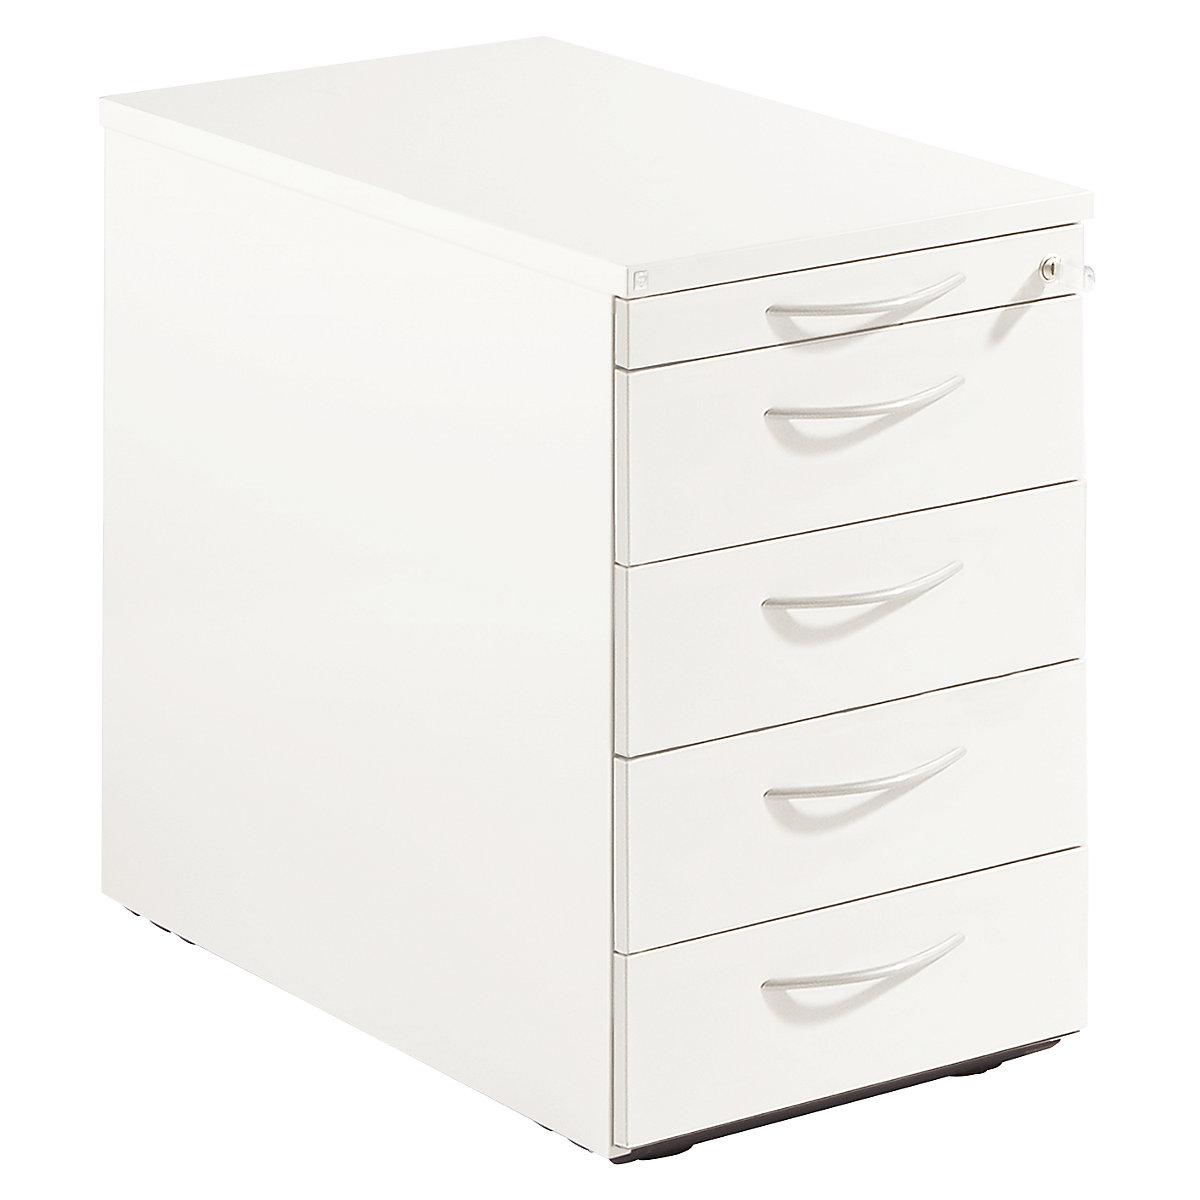 Fixed pedestal THEA, utensil drawer, 4 drawers, antique white-5